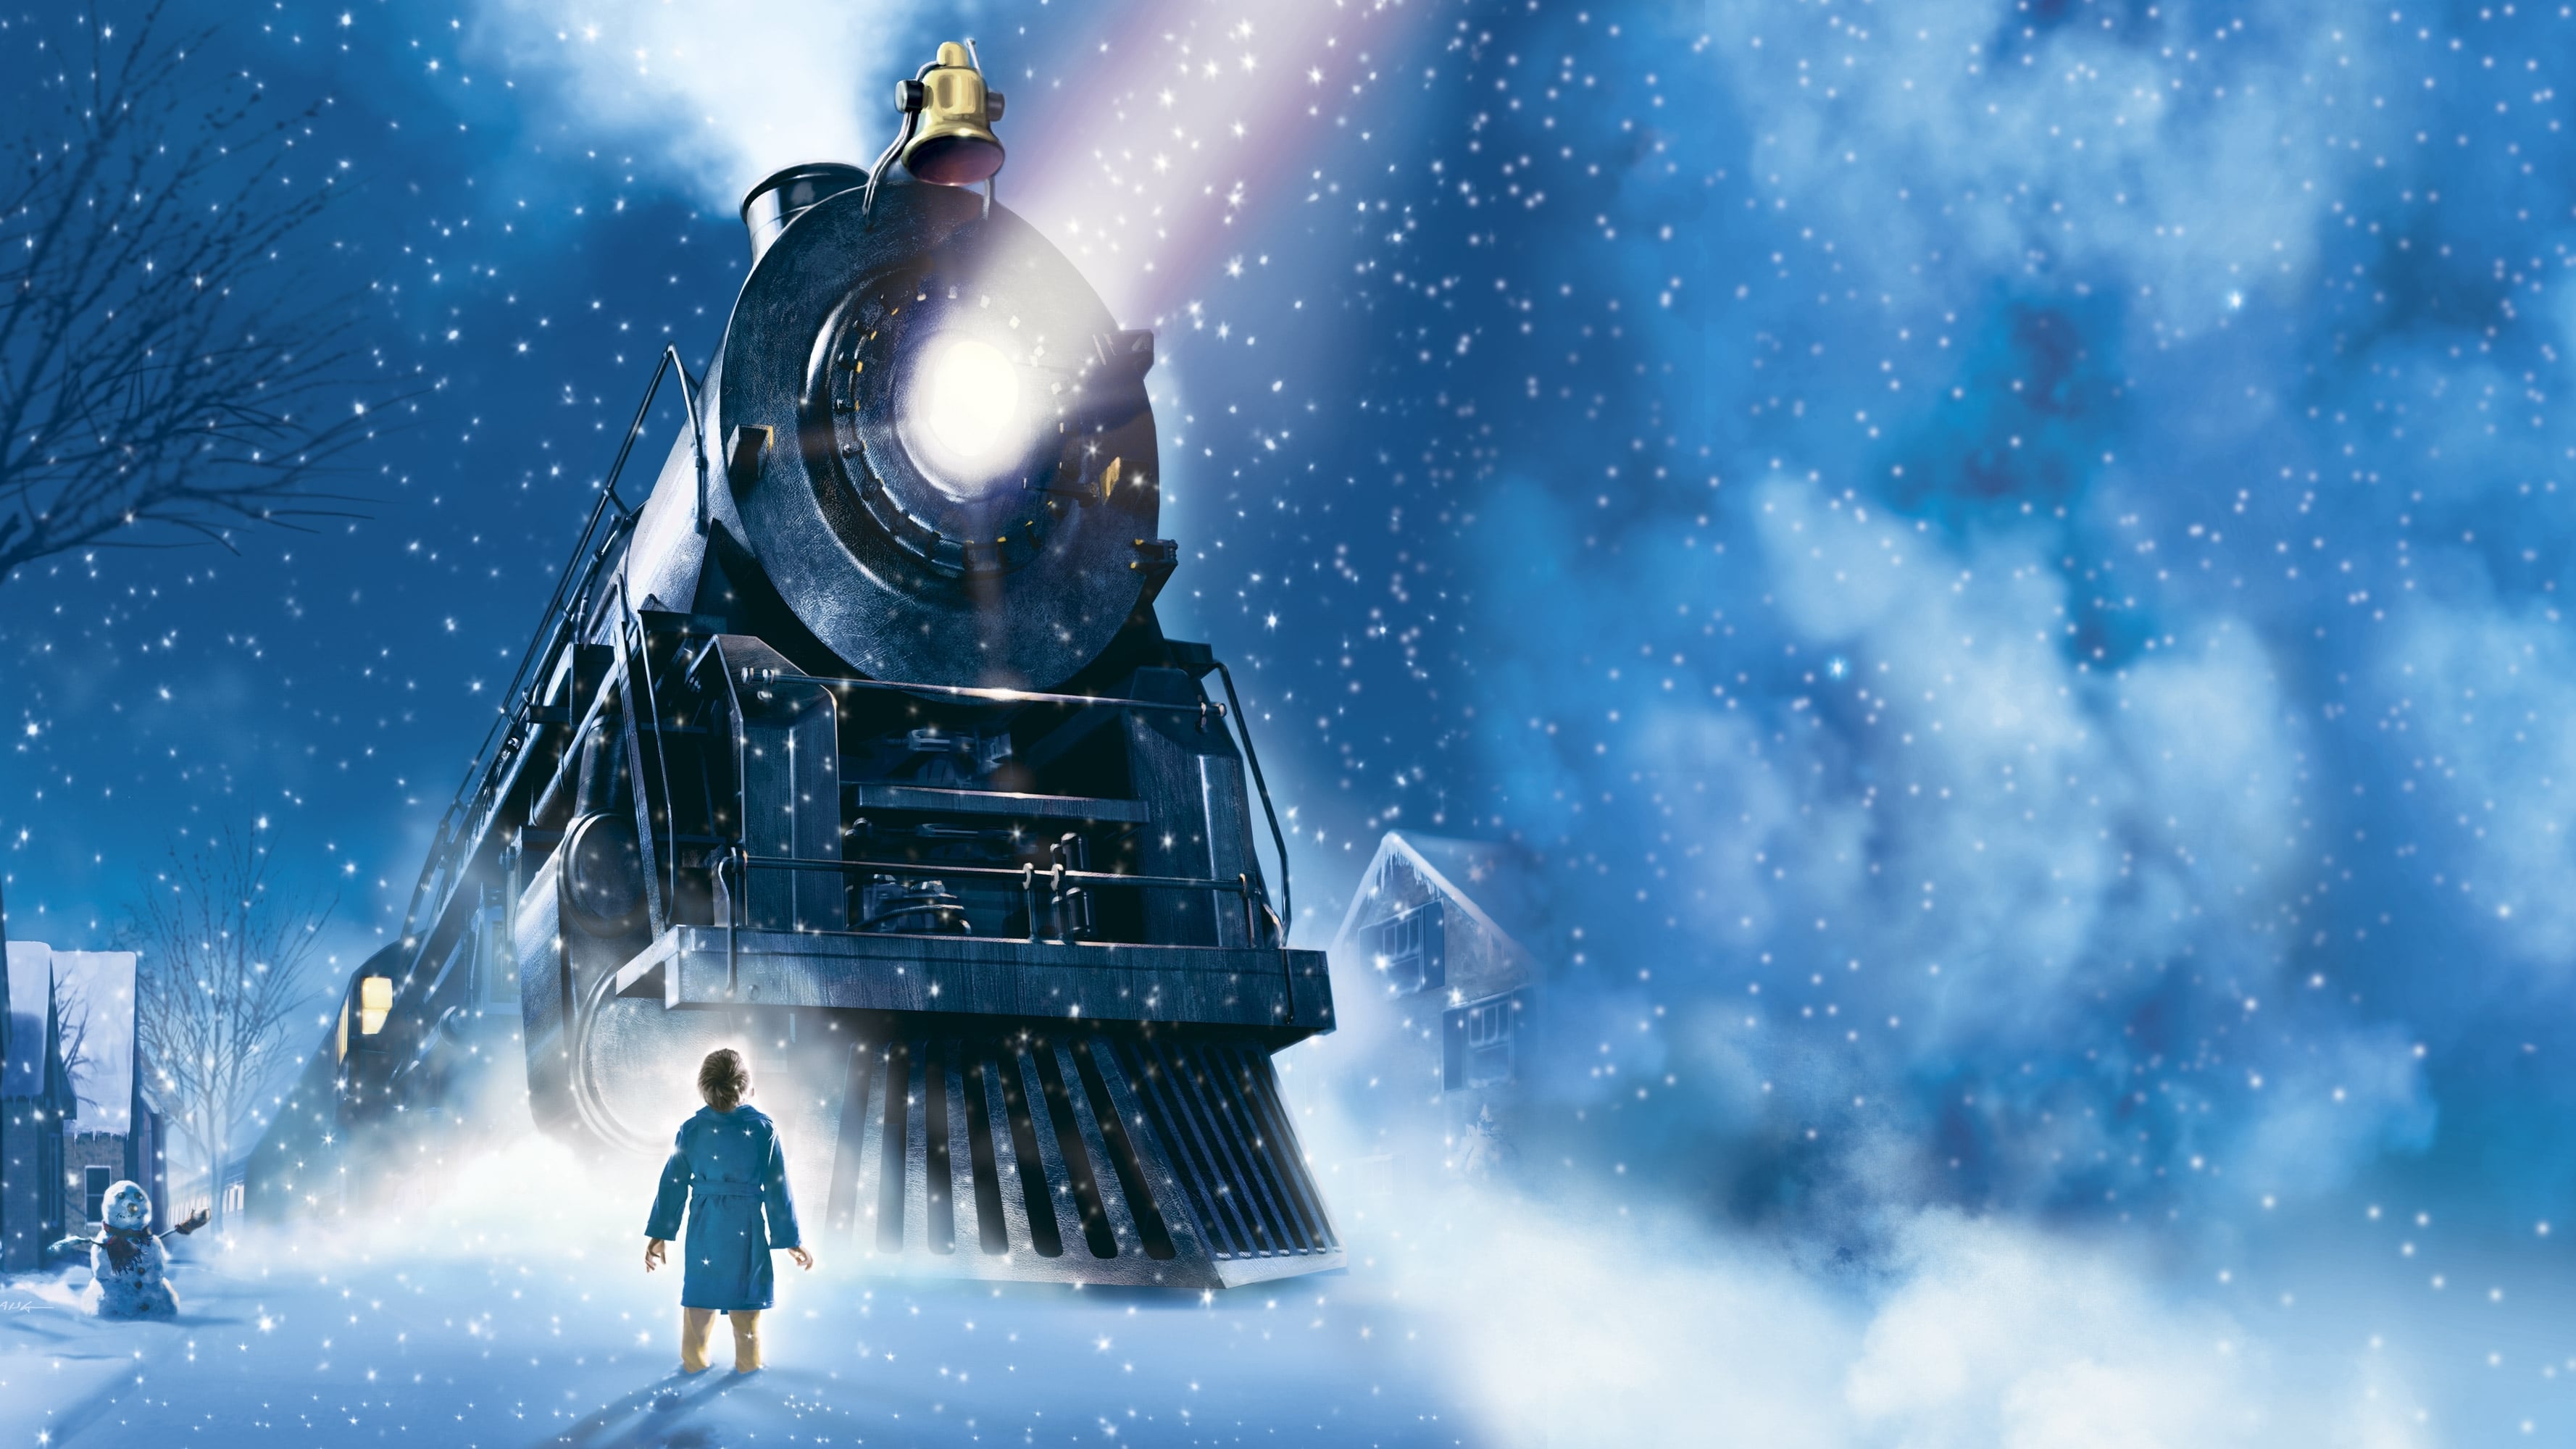 The Polar Express Wallpapers High Quality | Download Free